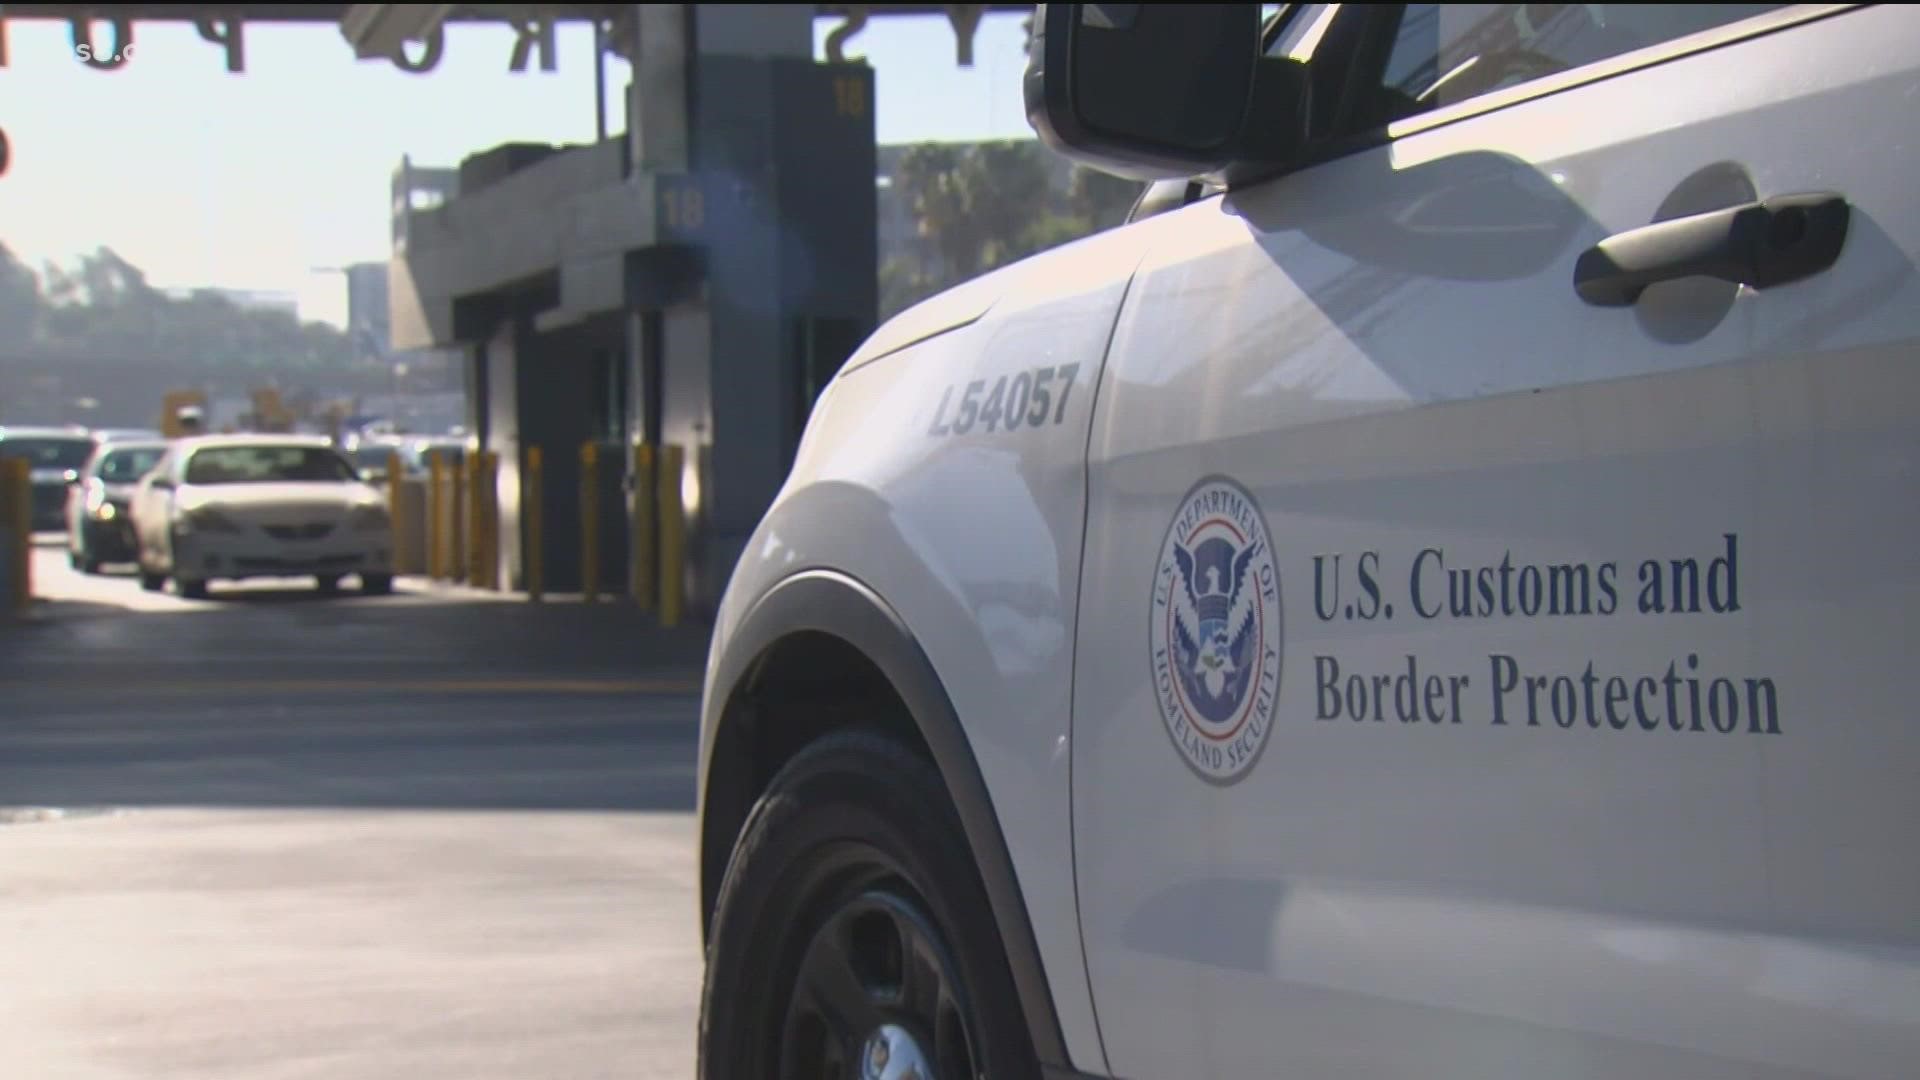 The Dept. of Homeland Security made the announcement, as migrant arrests have hit a 20-year high in recent months.